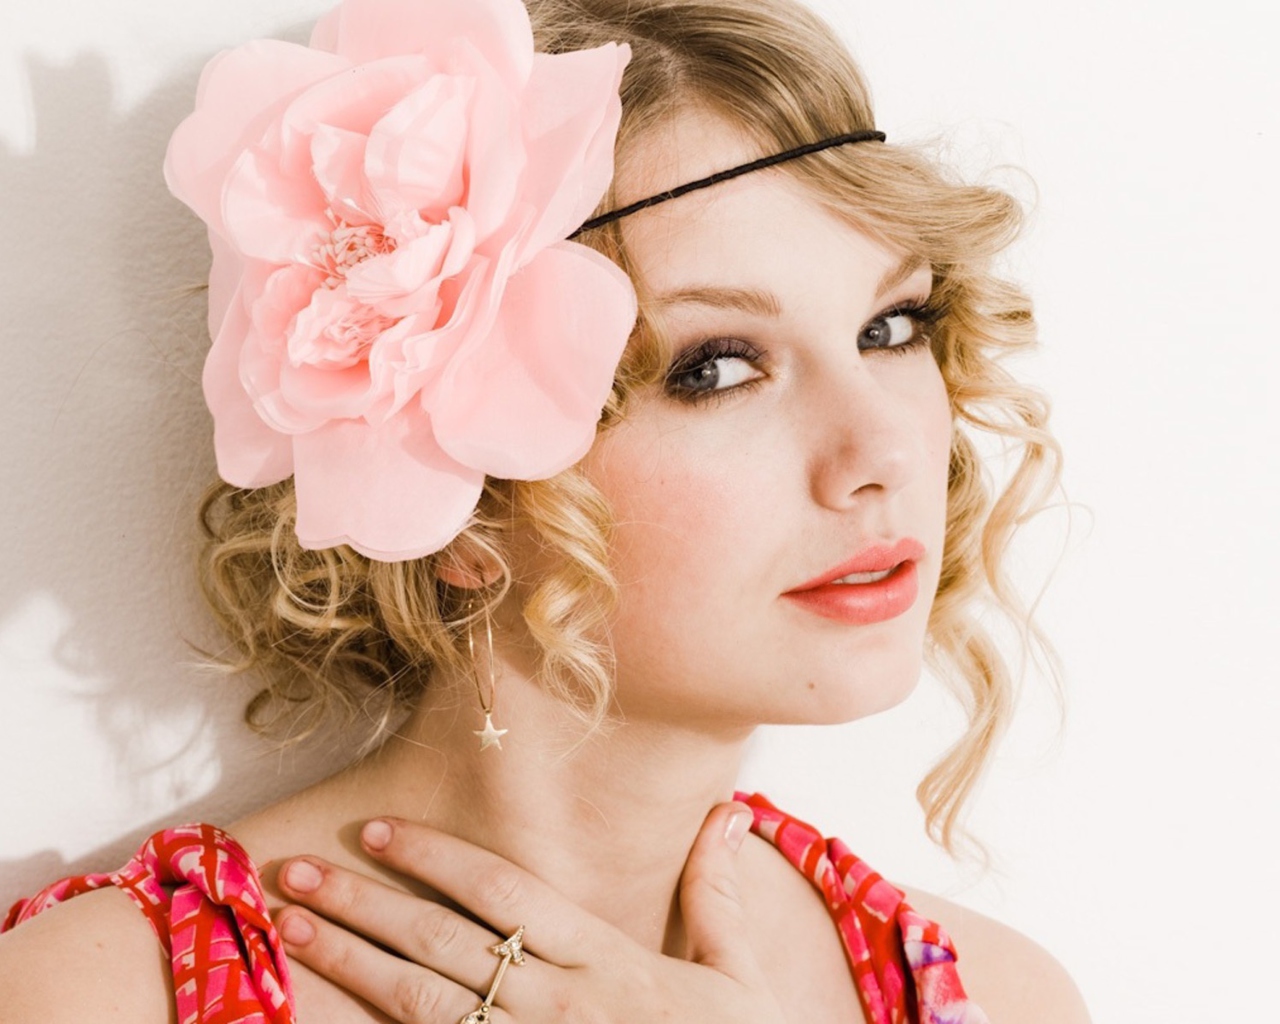 Taylor Swift With Pink Rose On Head wallpaper 1280x1024